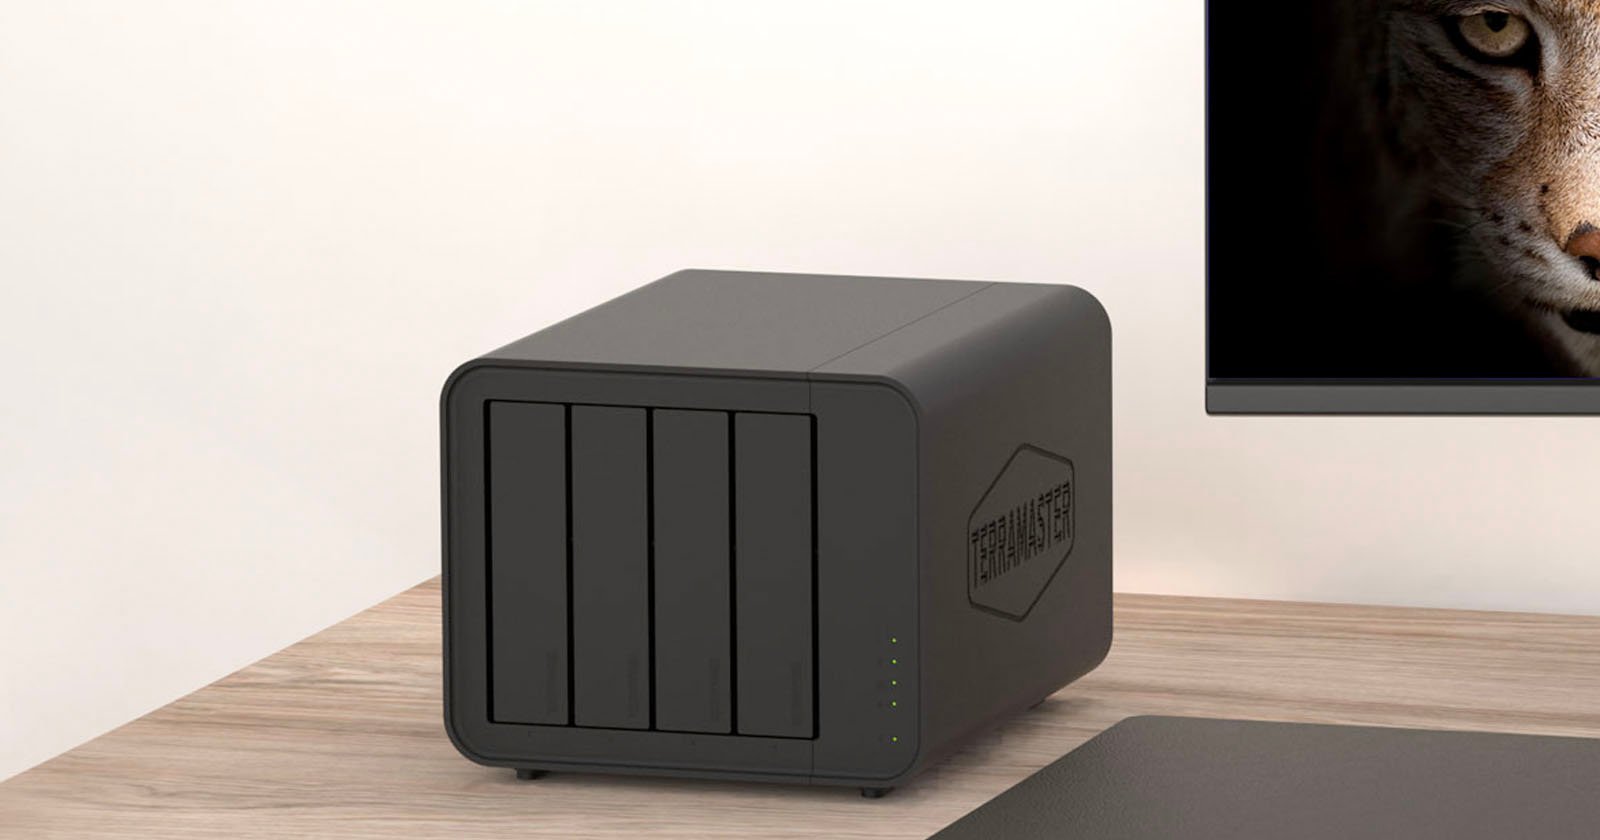 TerraMaster Challenges Synology With the Most Powerful 4-Bay NAS to Date